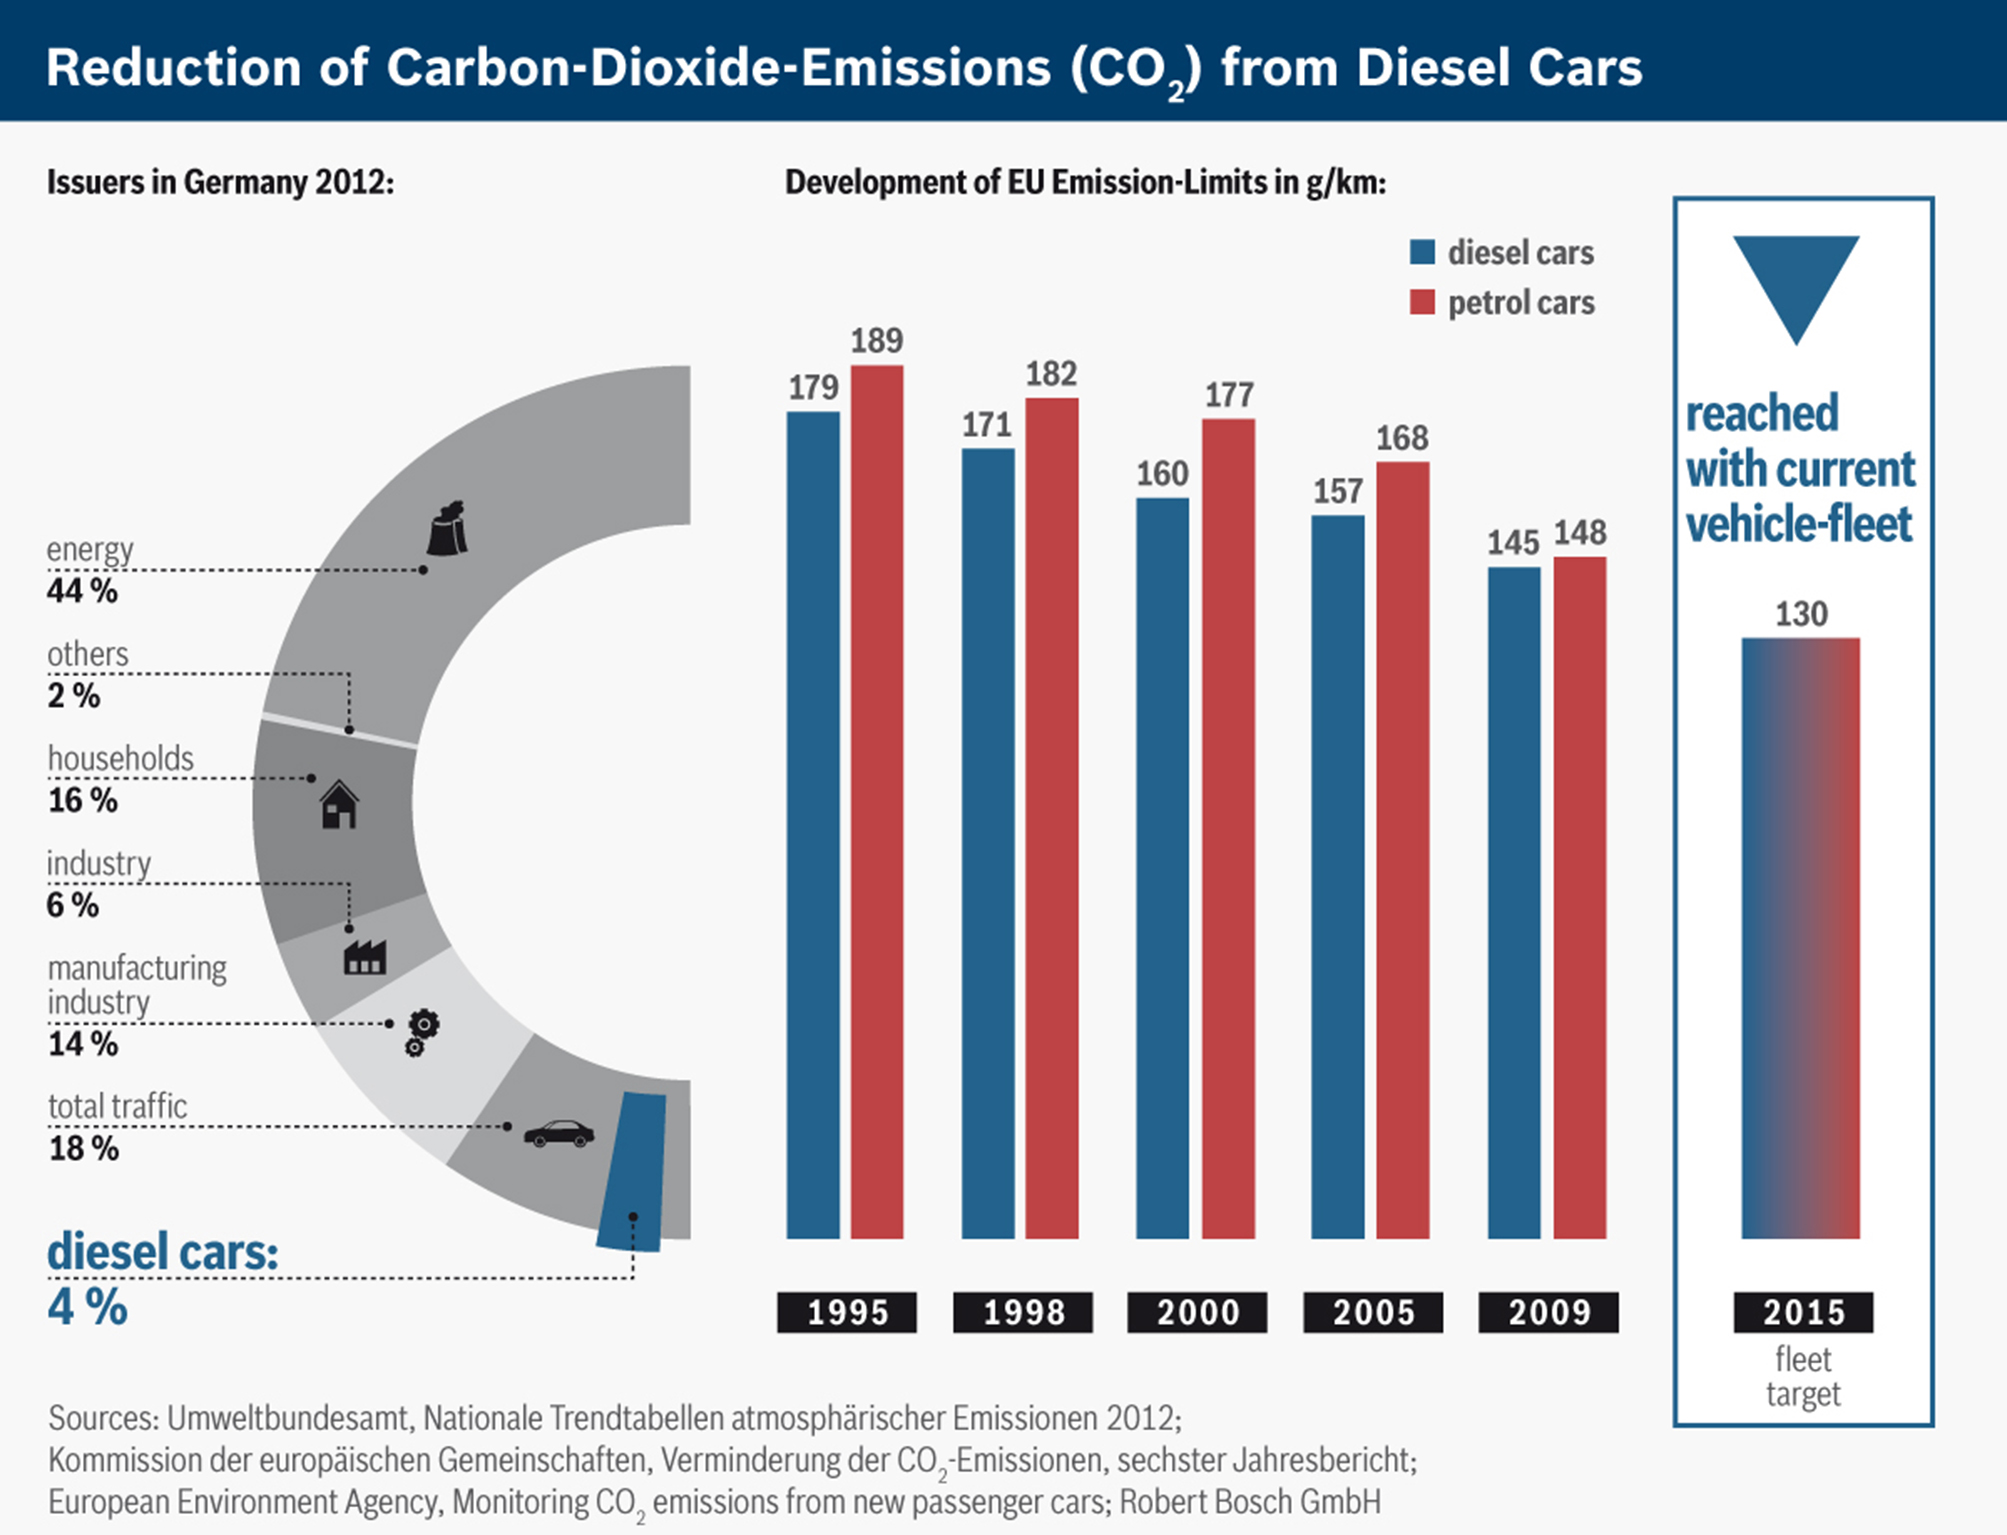 Reduction of CO2 for diesel cars